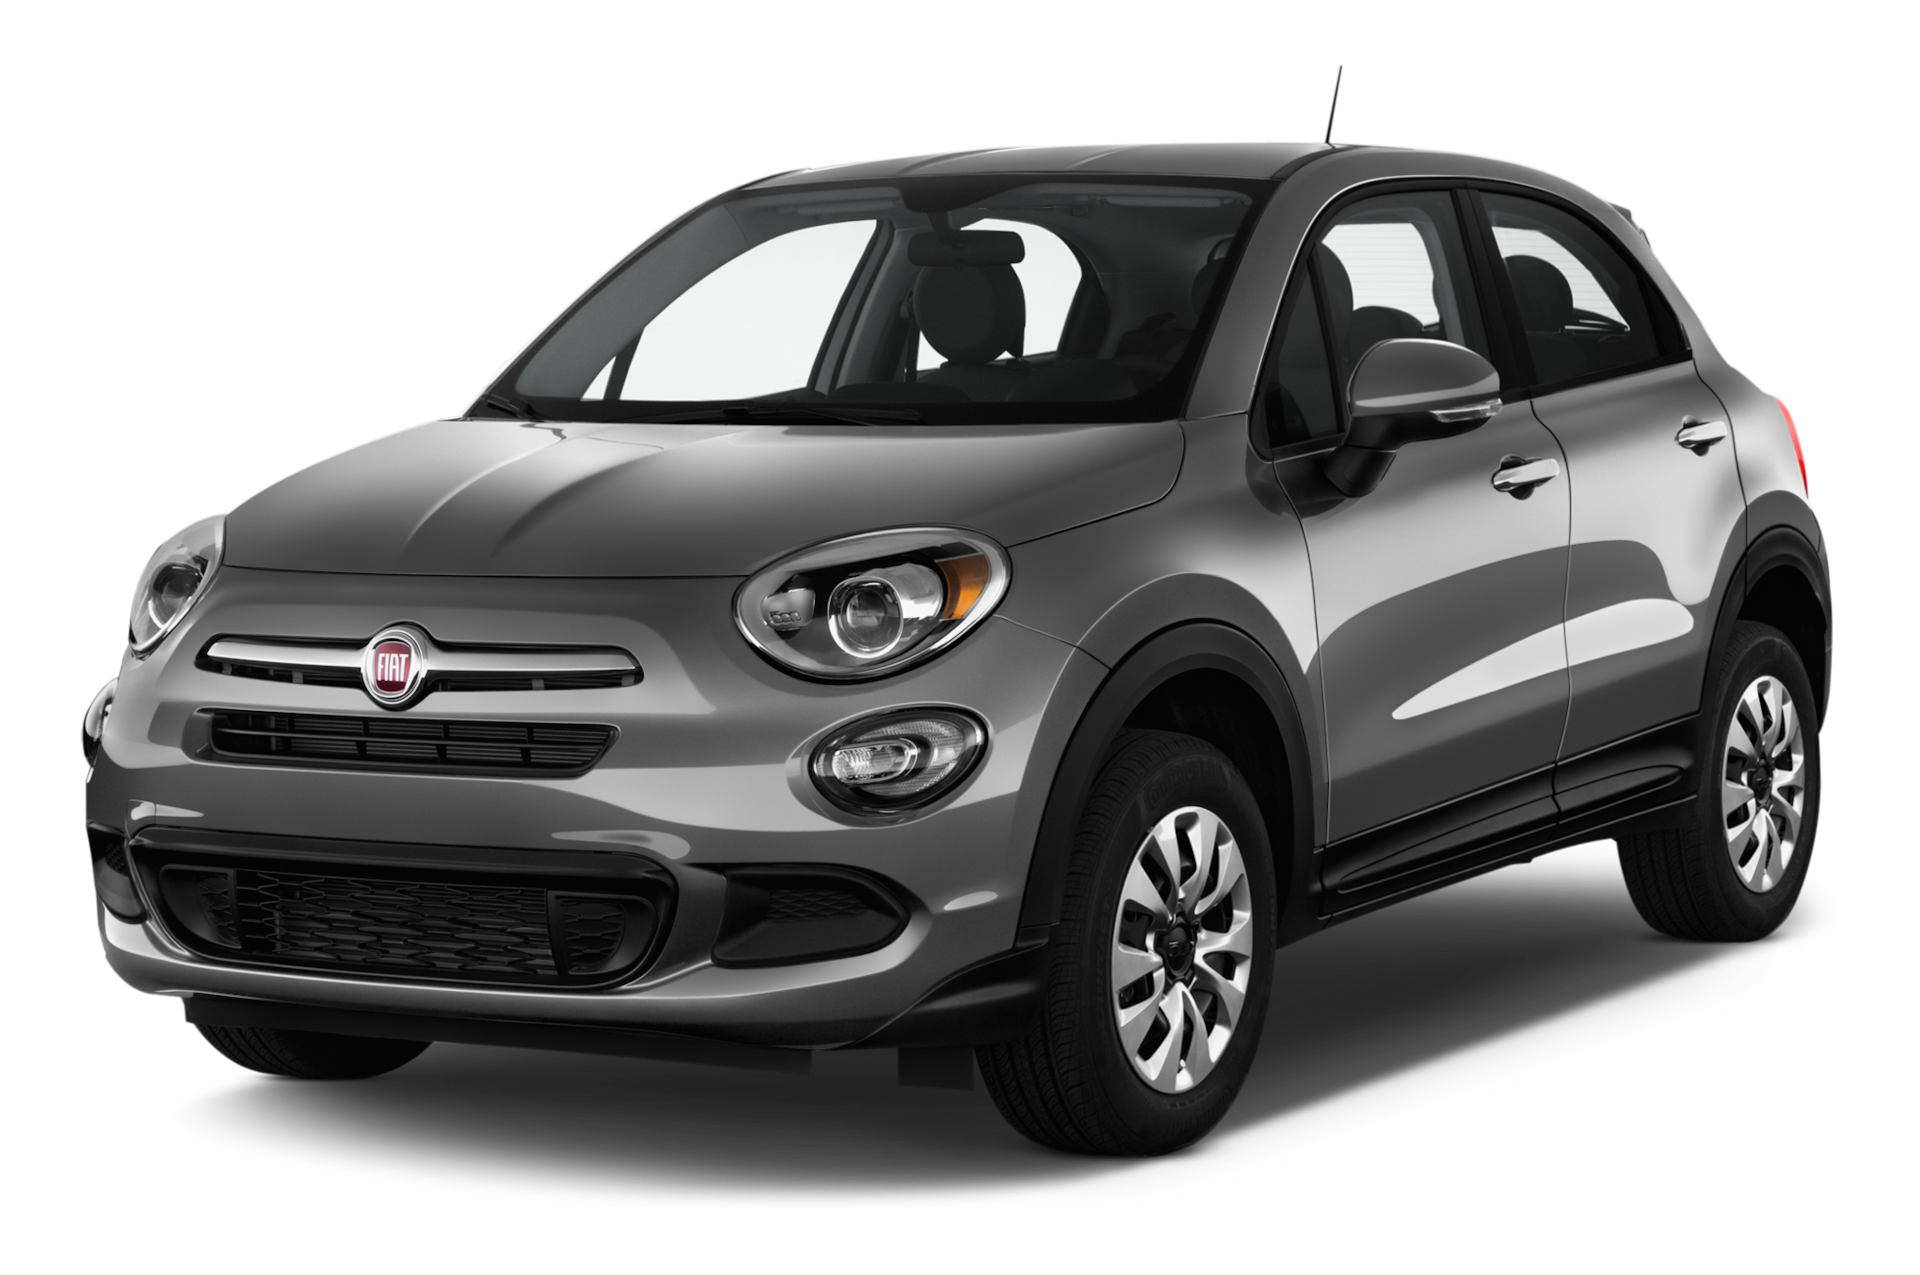 2016 FIAT 500X Prices, Reviews, and Photos - MotorTrend